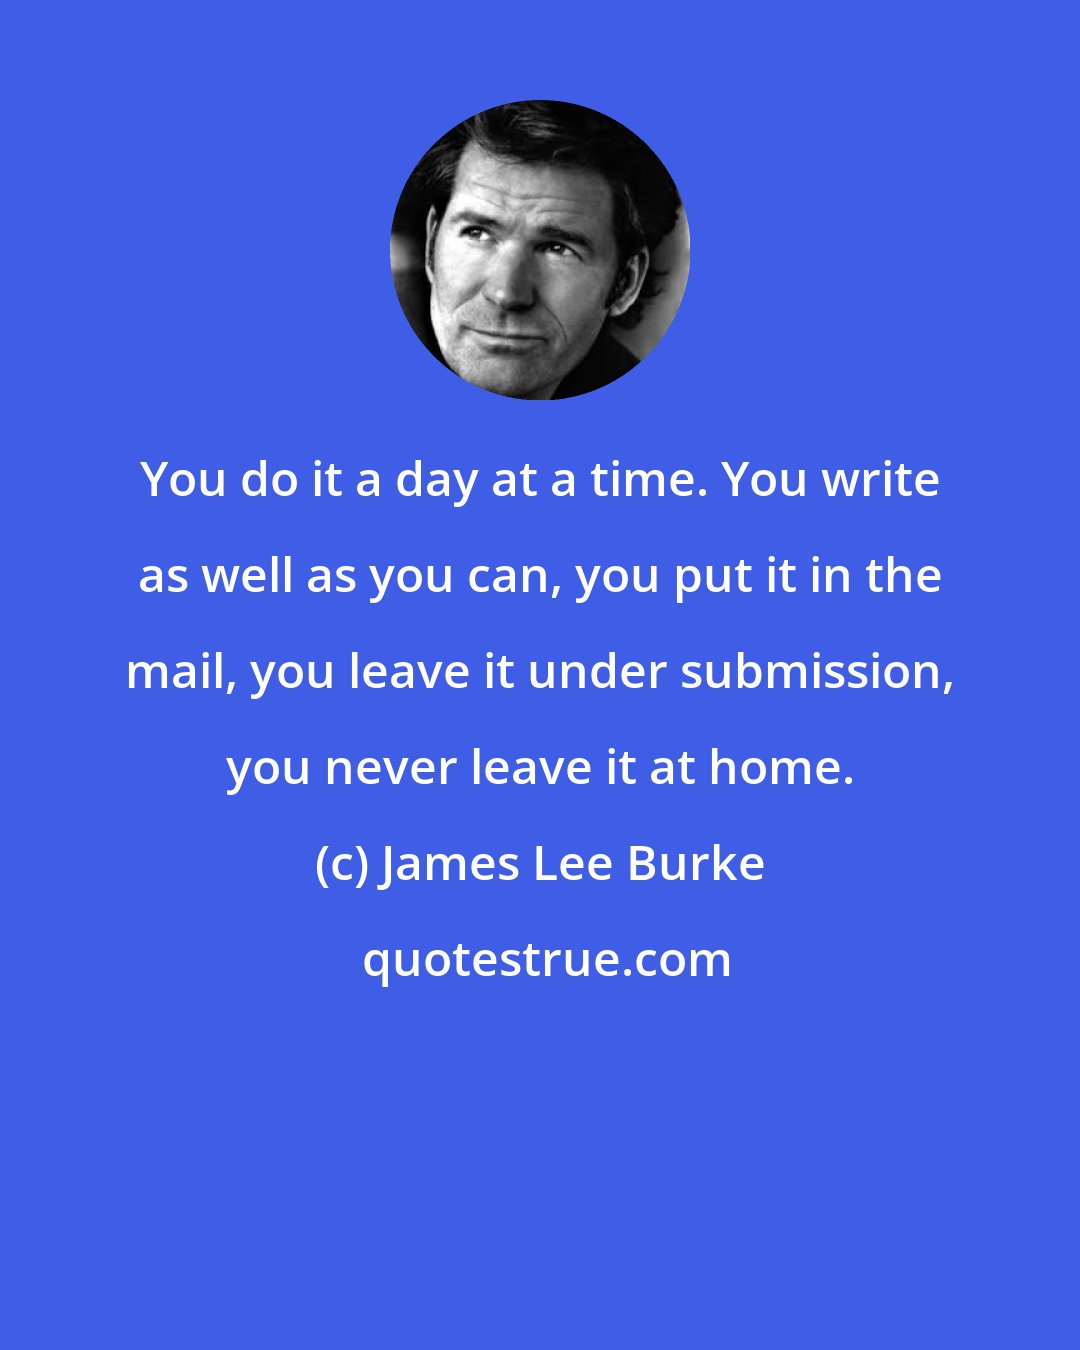 James Lee Burke: You do it a day at a time. You write as well as you can, you put it in the mail, you leave it under submission, you never leave it at home.